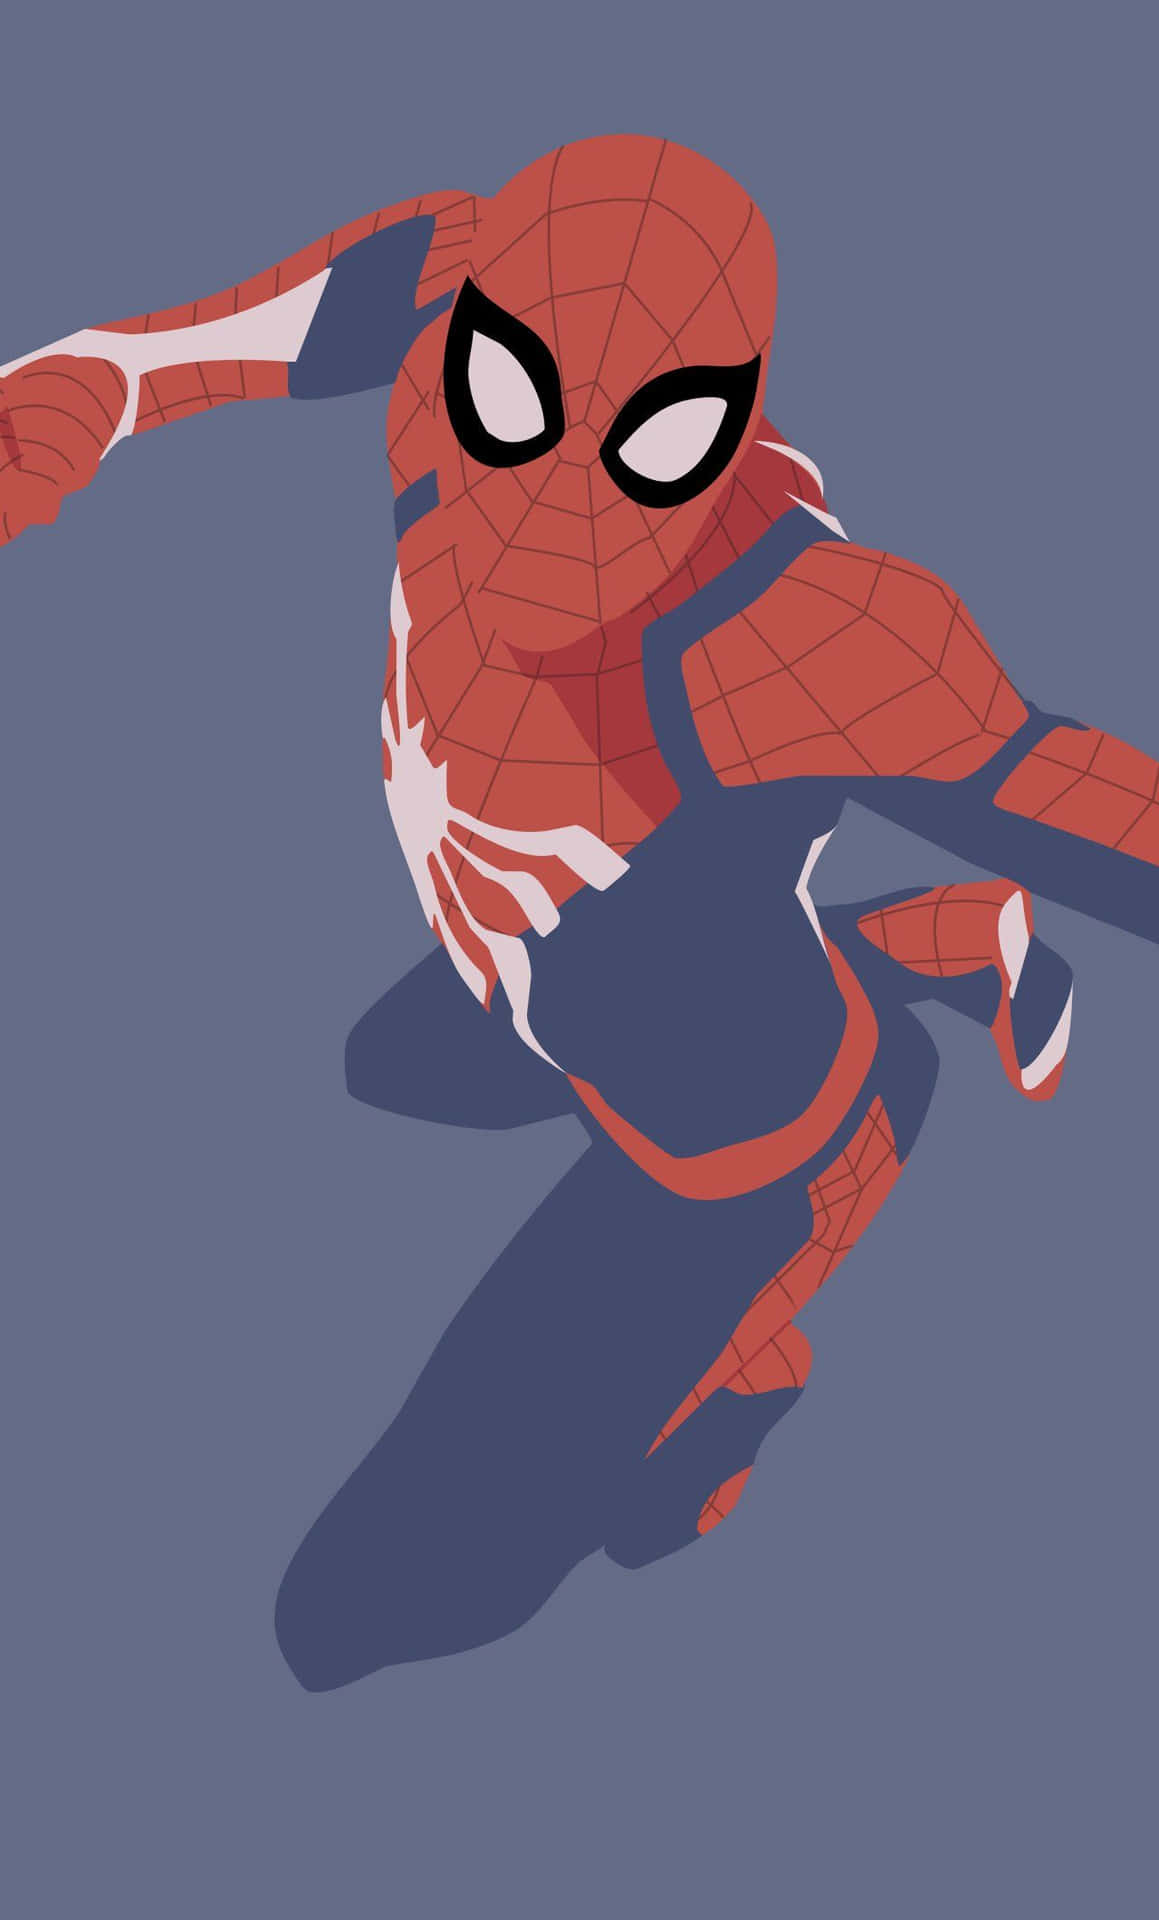 Experience the Epic Adventure of Spider-Man with this Aesthetic Wallpaper